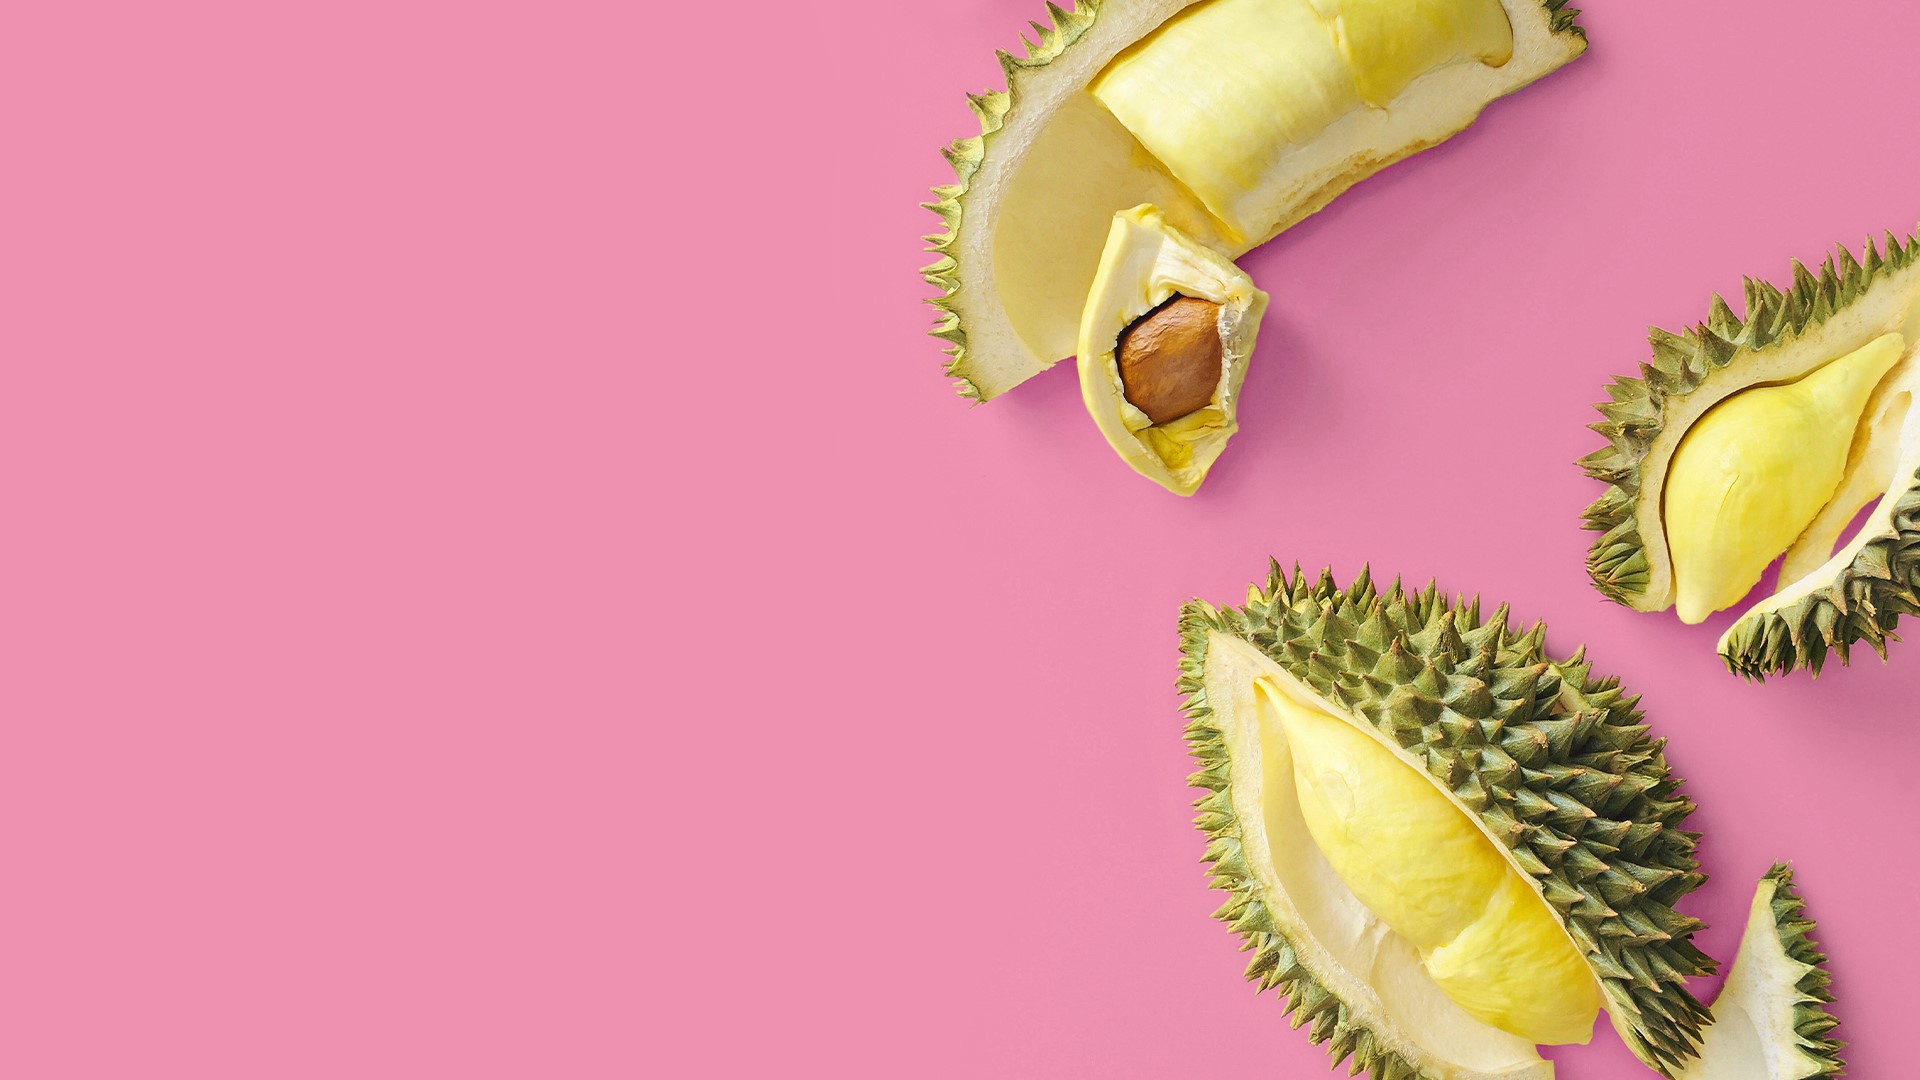 Buckle up, Durian lovers: Singapore is ready for the Durian season. featured image